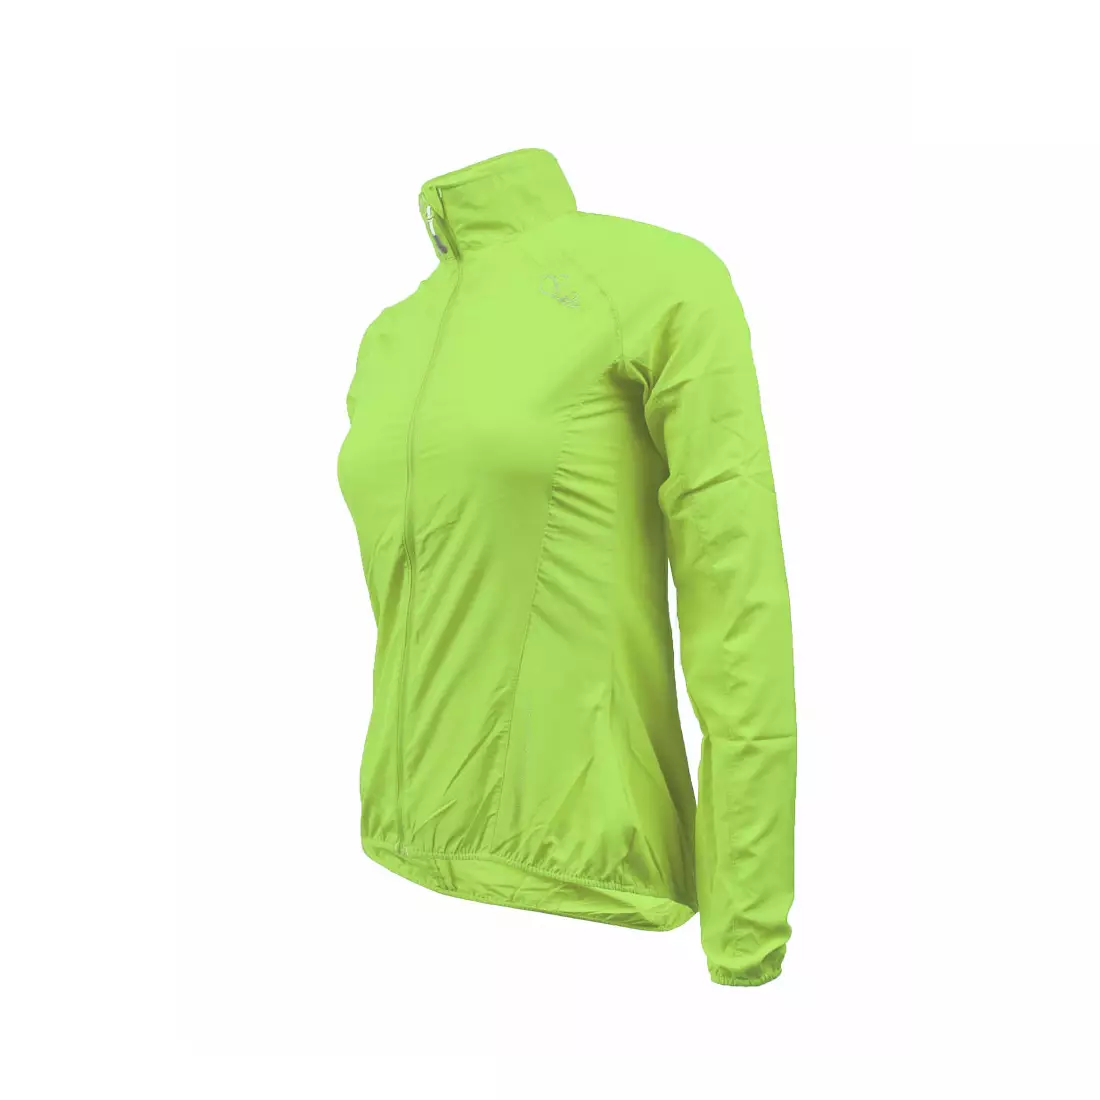 DARE2B Blighted Windshell Women's Cycling Windbreaker DWL106-59Y, Color: Green